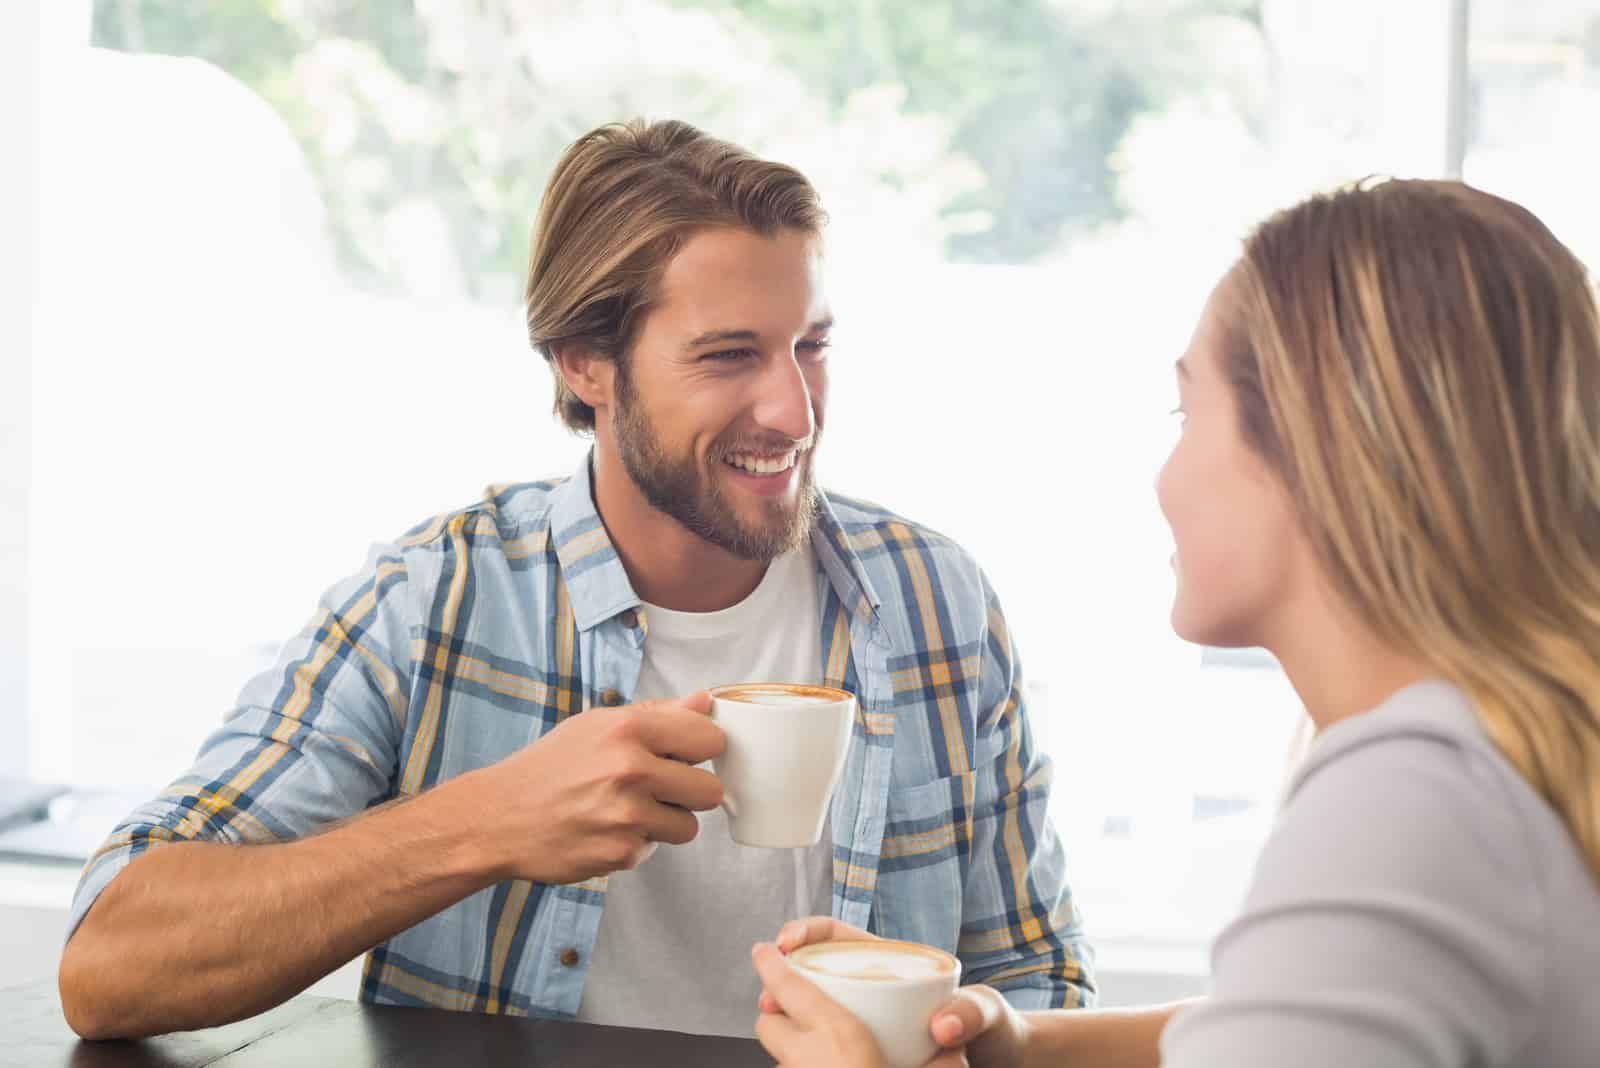 a smiling man holds a cup in his hand and talks to a woman